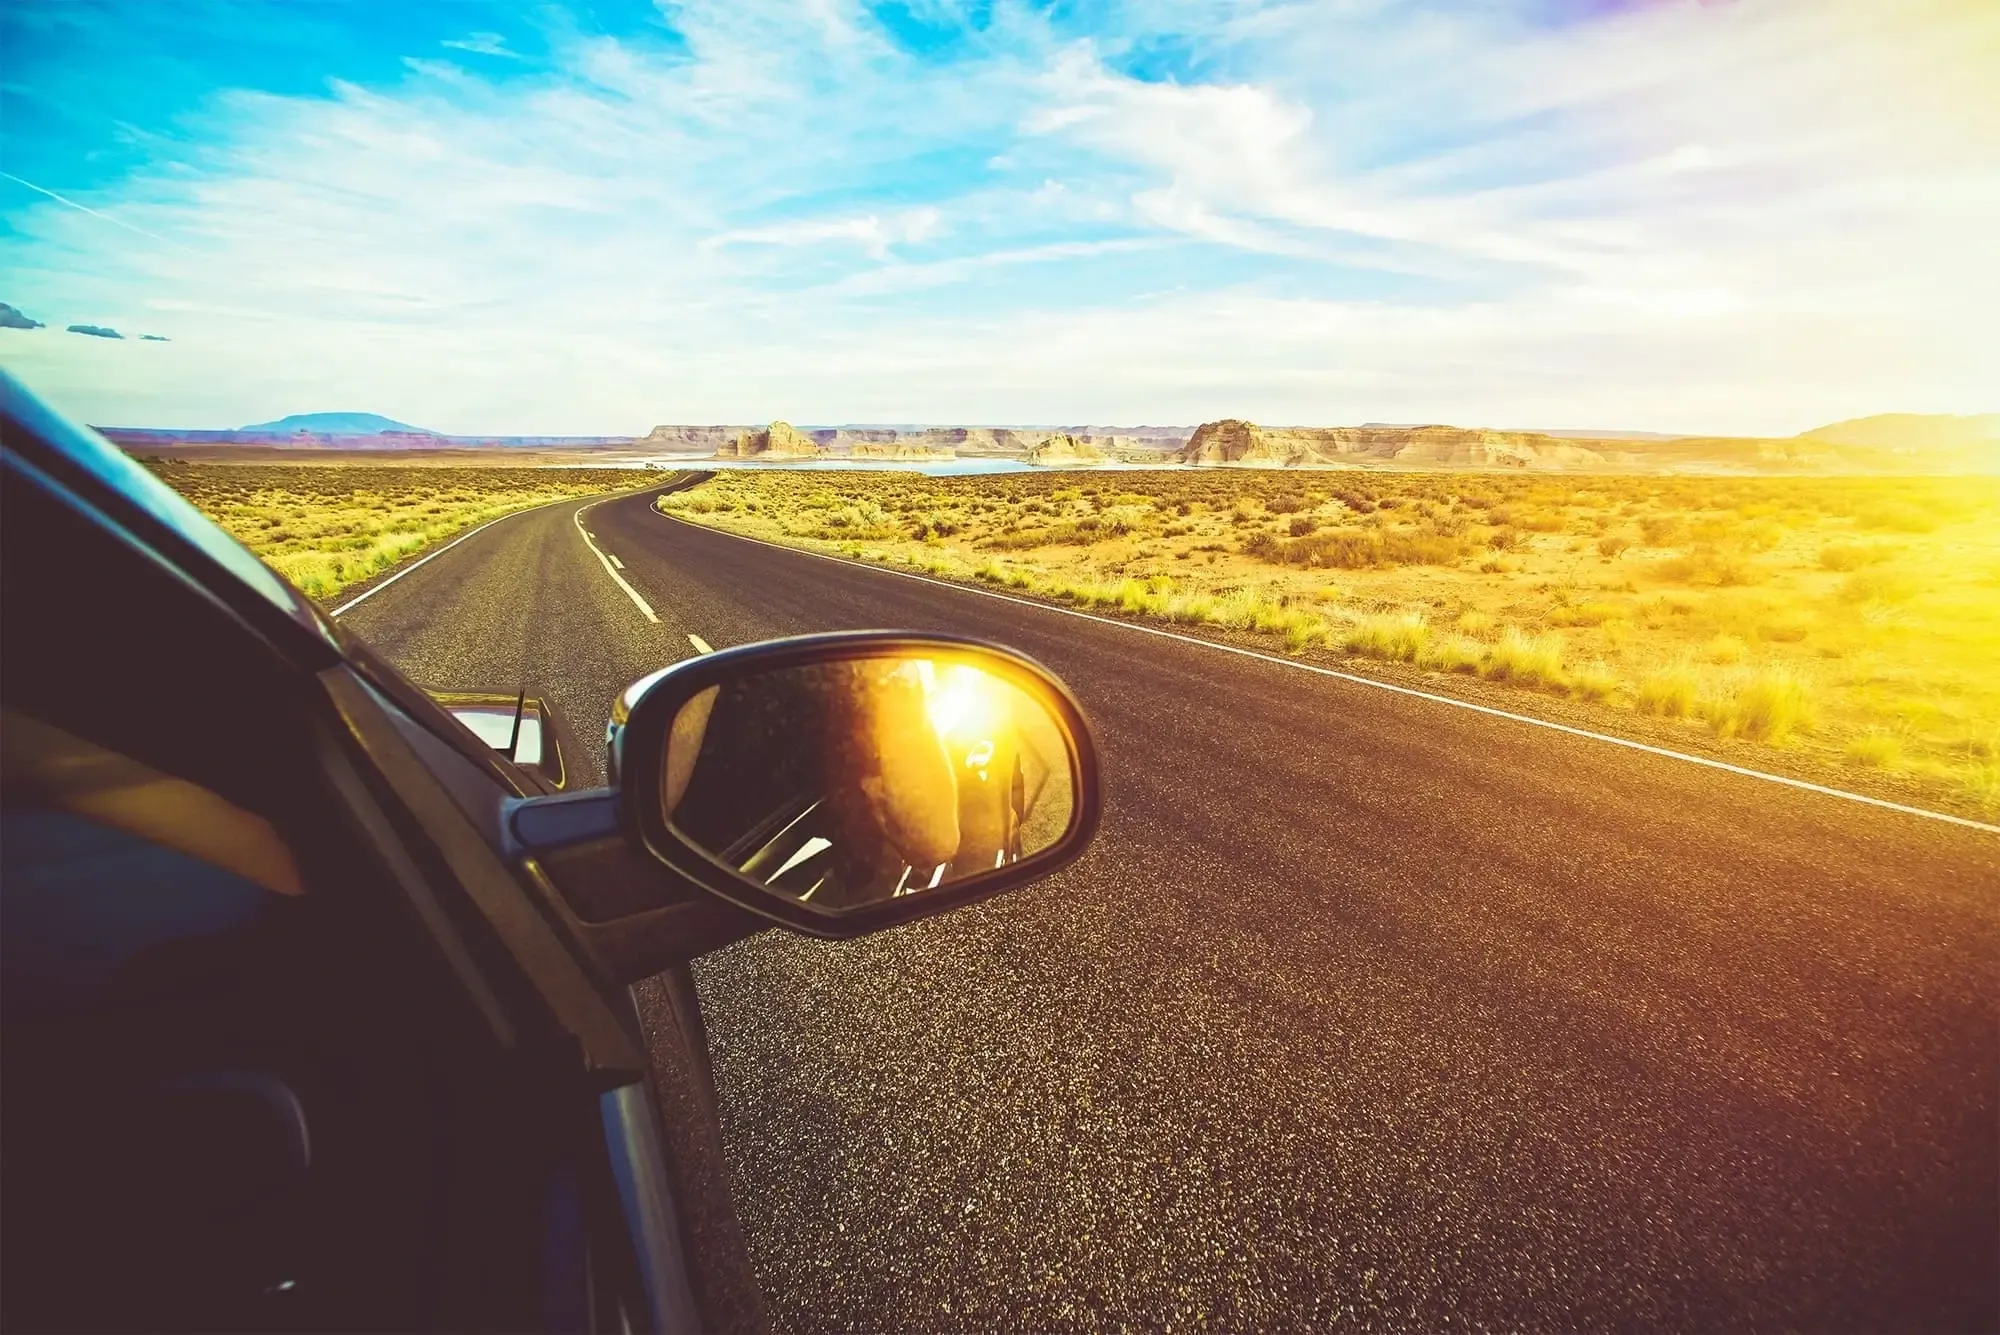 A car's side mirror reflects a desert landscape during a road trip, showcasing the vastness and beauty of the arid terrain.